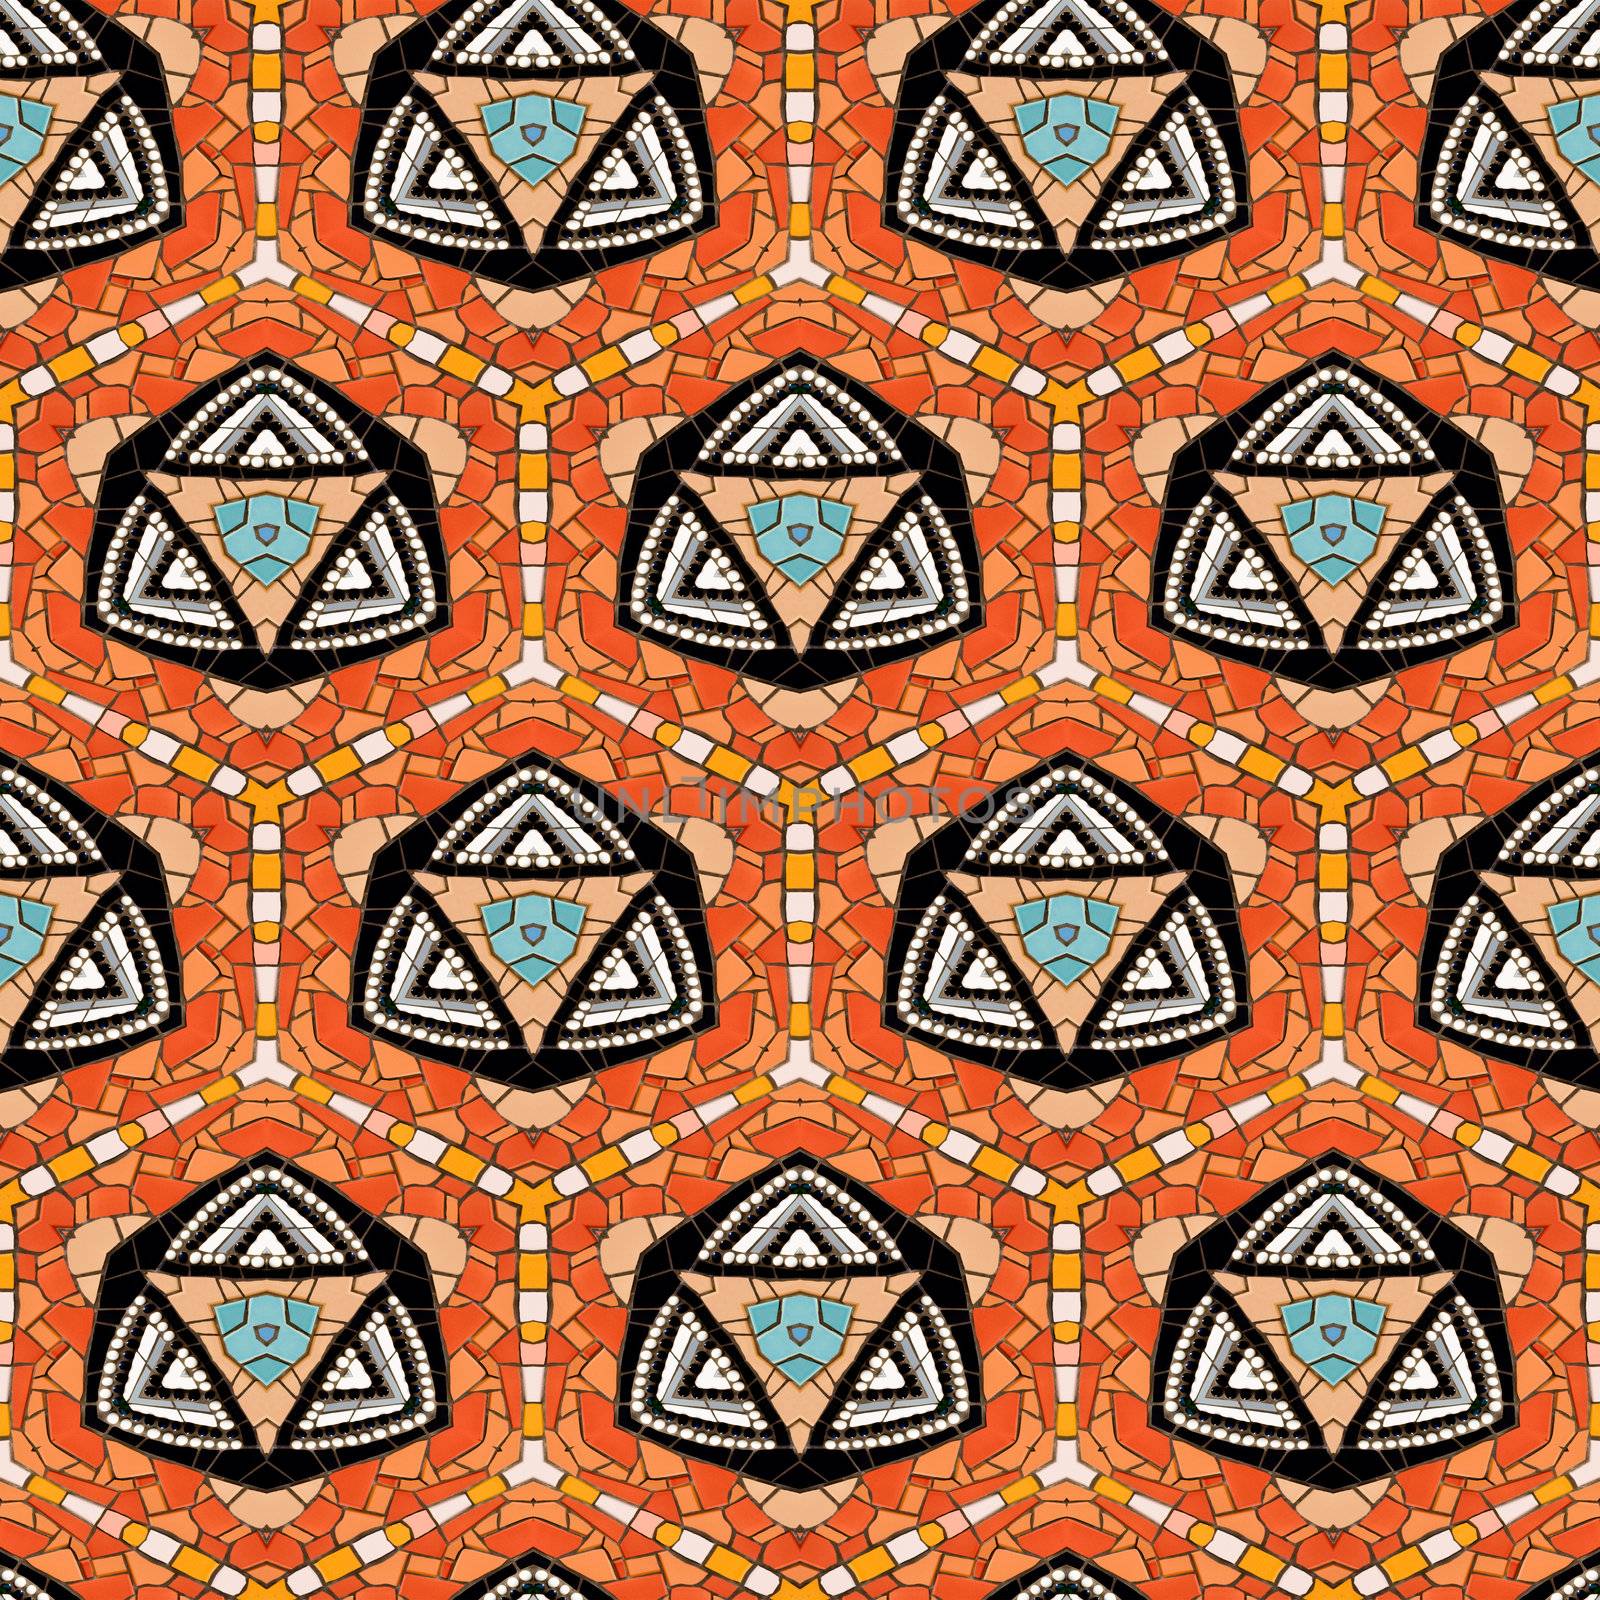 Seamless tiled mosaic pattern of kaleidoscopic altered hexagonal real ceramic tiles arranged to form colorful triangle shapes for a repeated textured background effect.